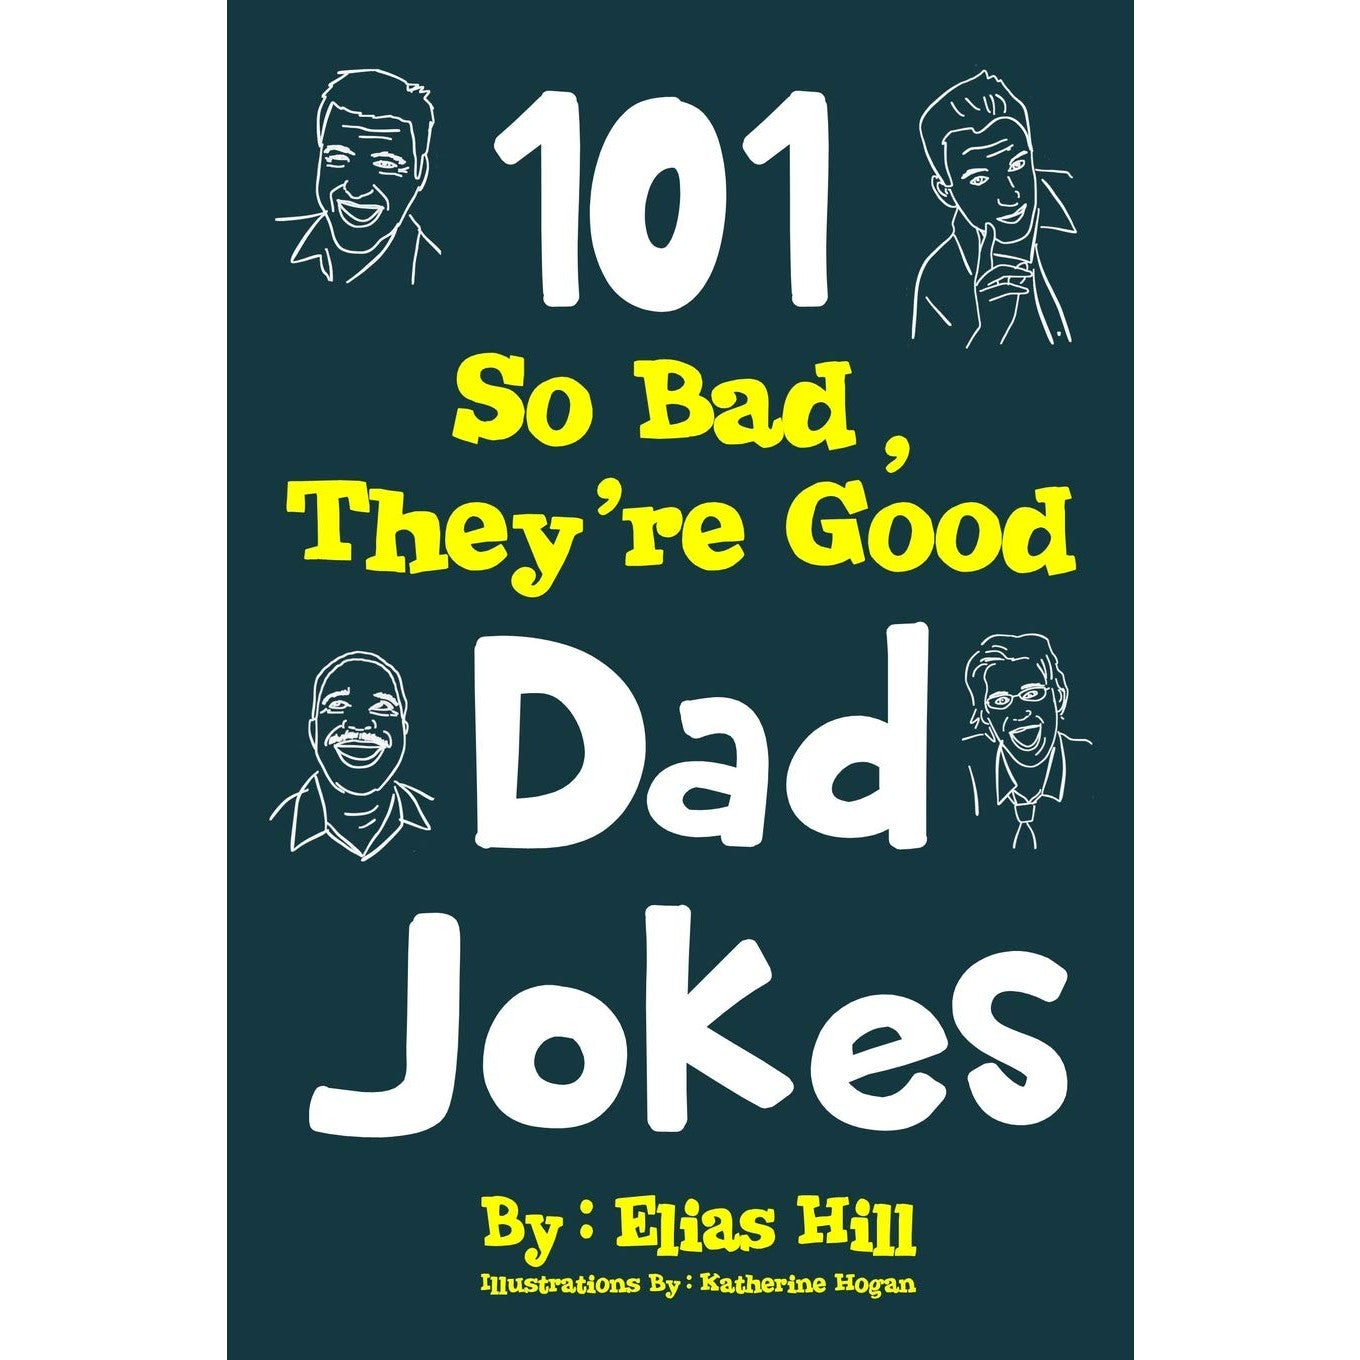 101 So Bad They're Good Dad Jokes - oddgifts.com